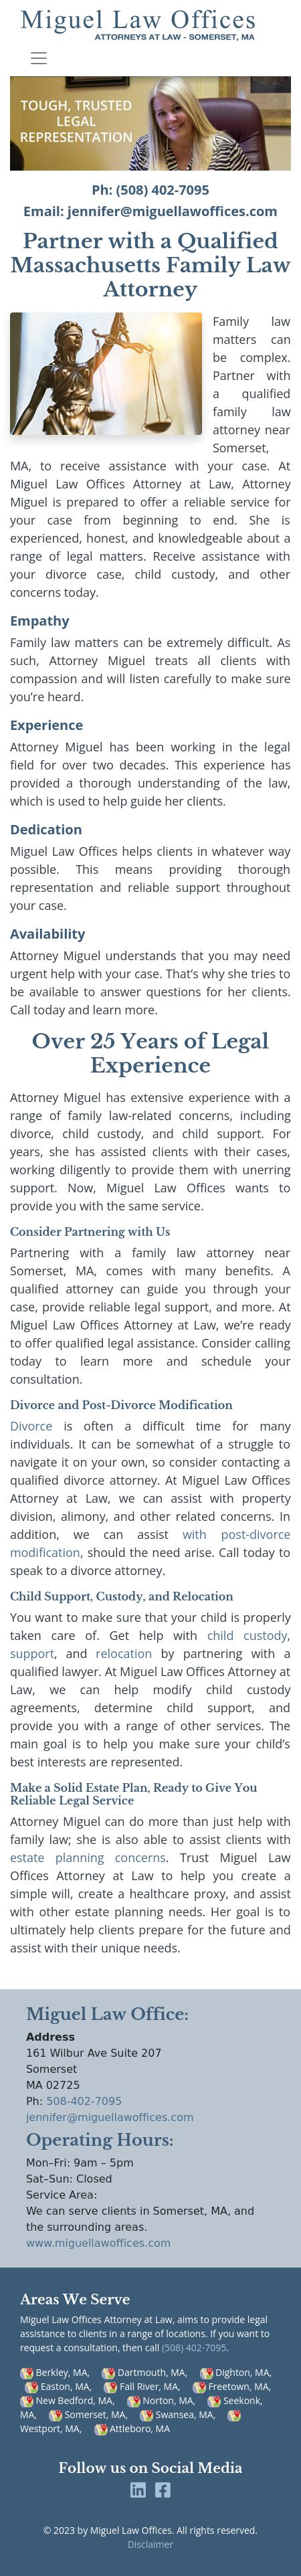 Miguel Law Offices - Somerset MA Lawyers